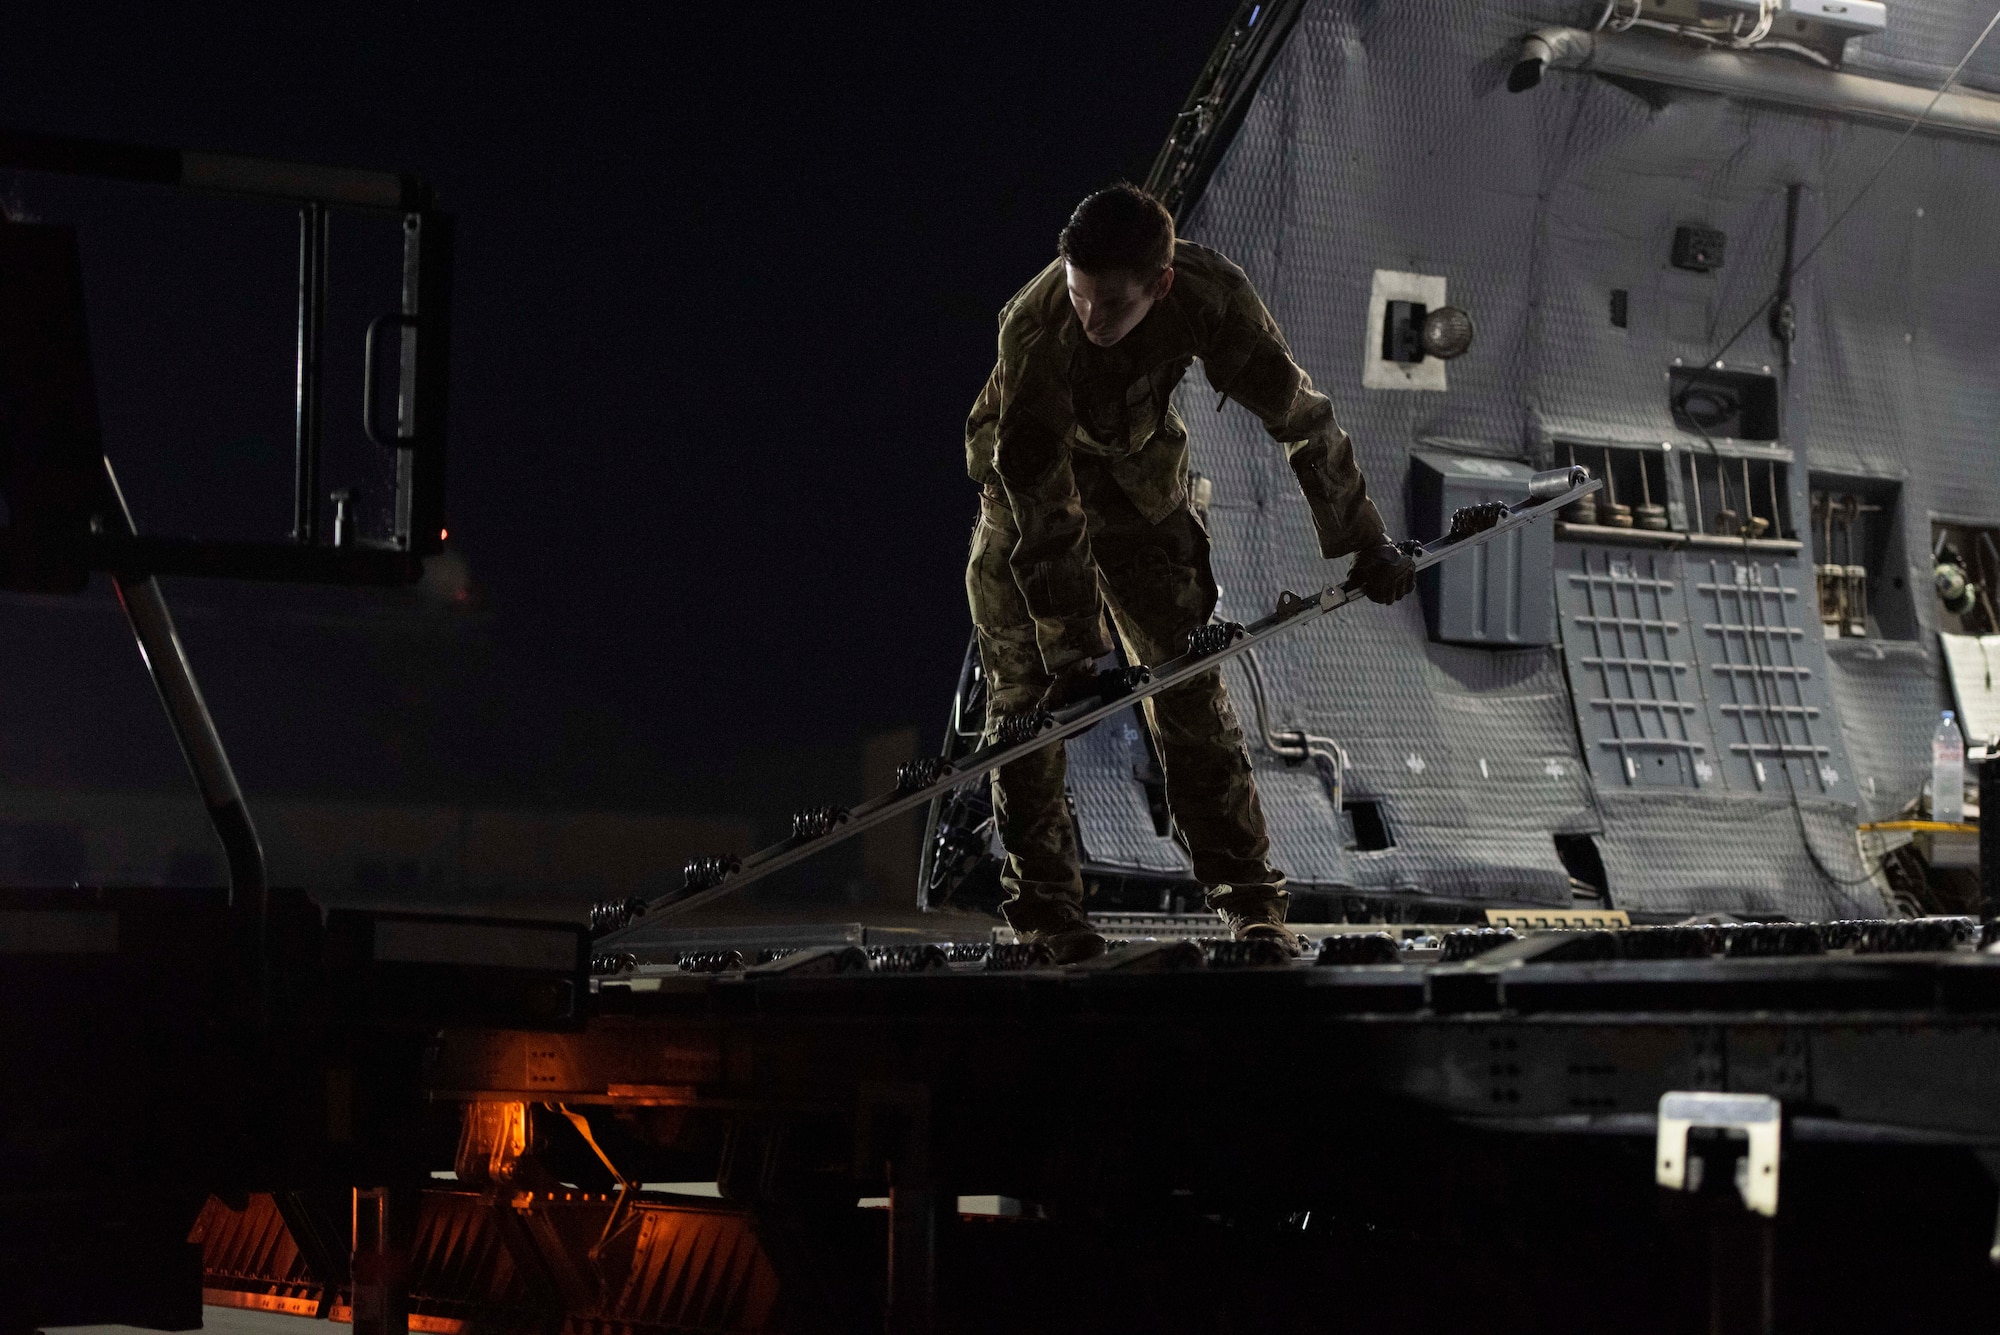 An Airman puts down a roller from a large aircraft onto a vehicle.